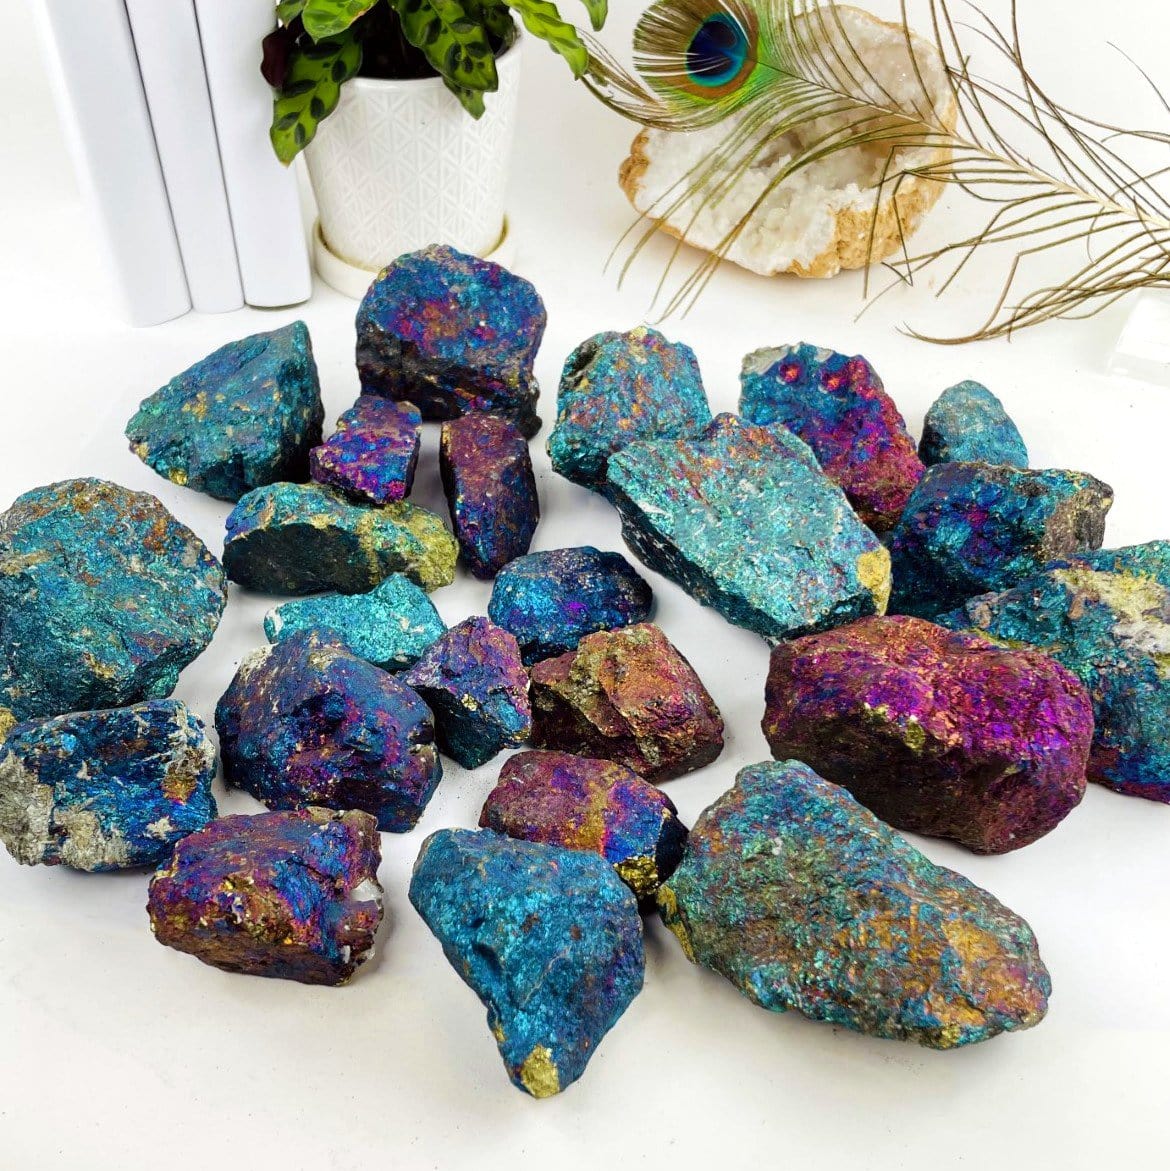 Assorted sizes of peacock ore rough stones on a white background.  They are a metallic shade of pinks, blues, and purples.